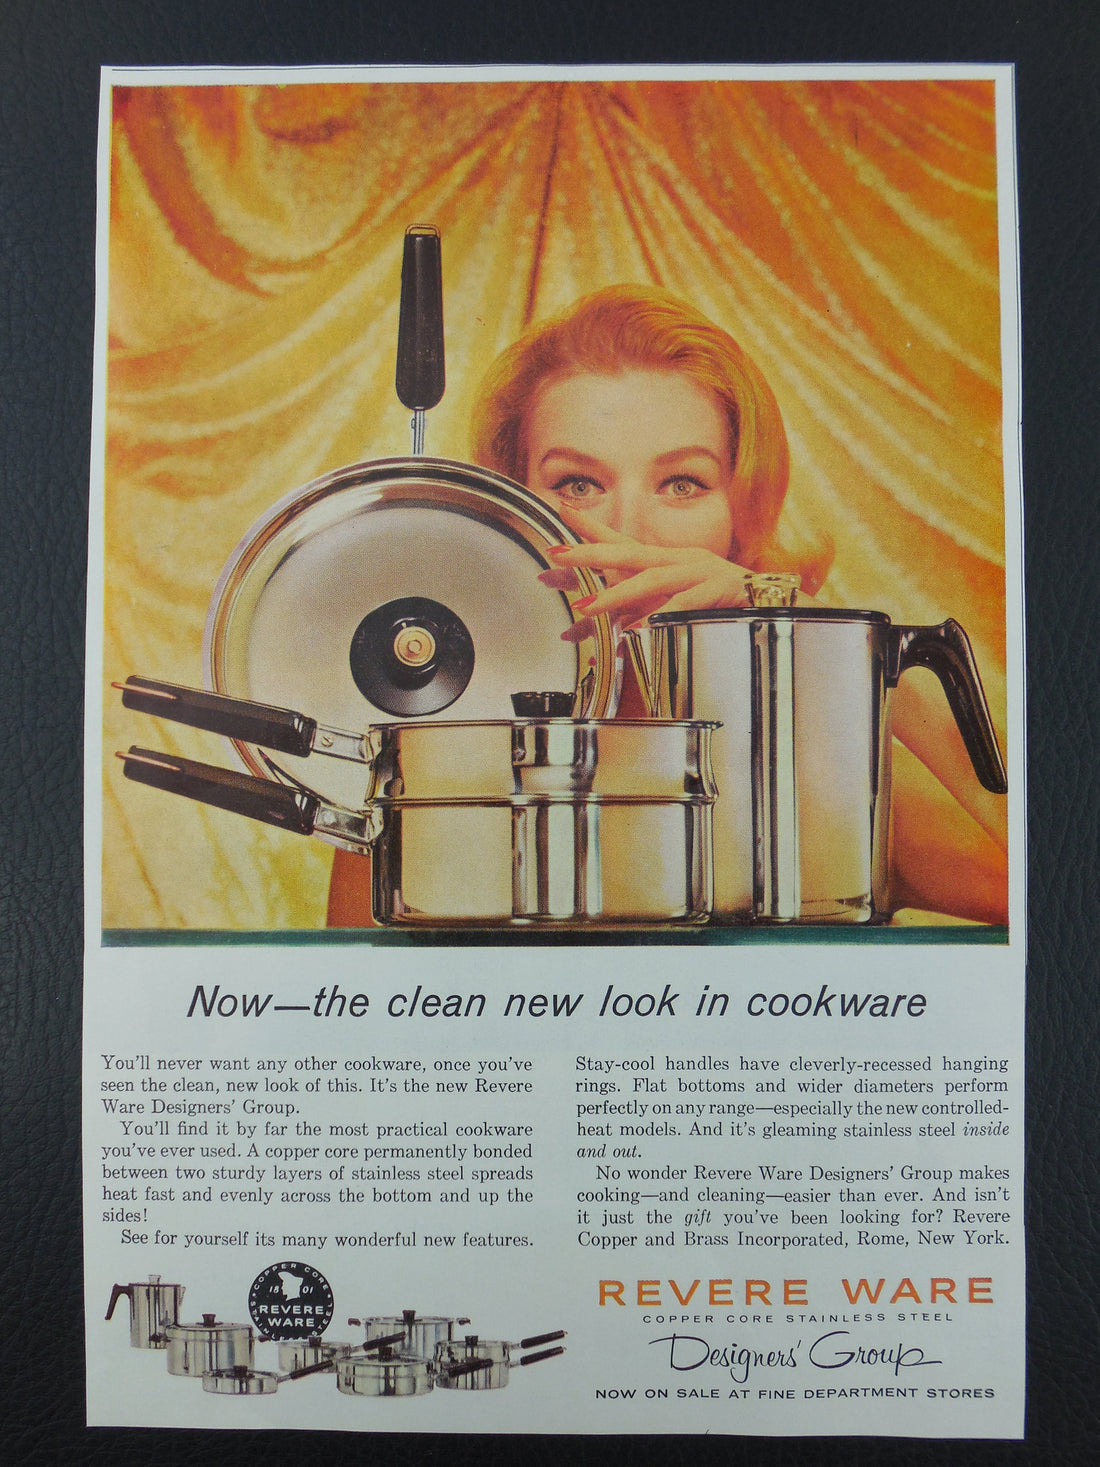 1959 Revere Ware Designers' Group Cookware Advertisement